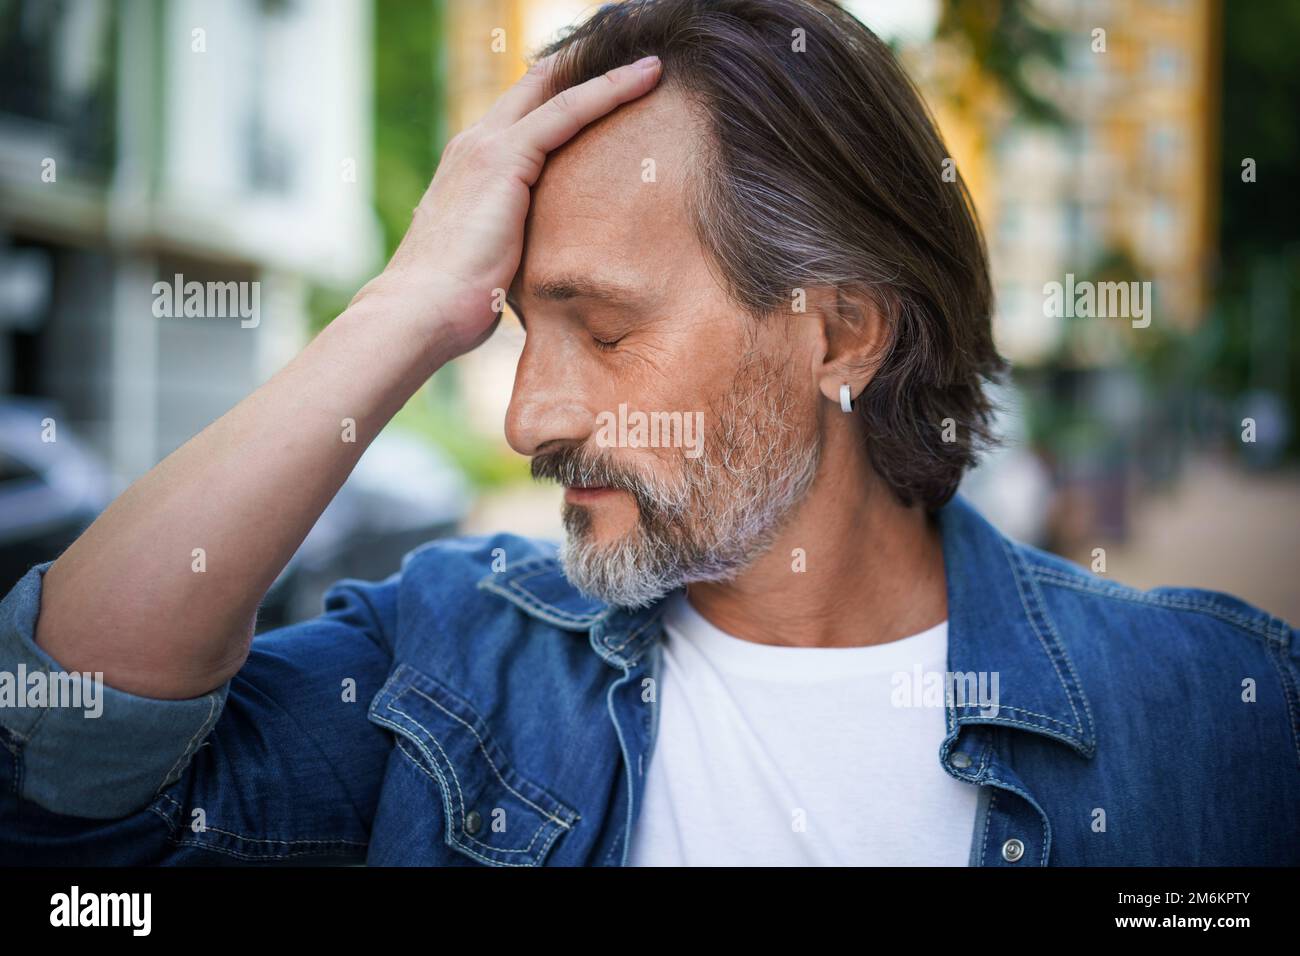 Handsome man overpass middle age crisis touching his forehead looking emotionally exhausted. Experiencing headache, stress matur Stock Photo